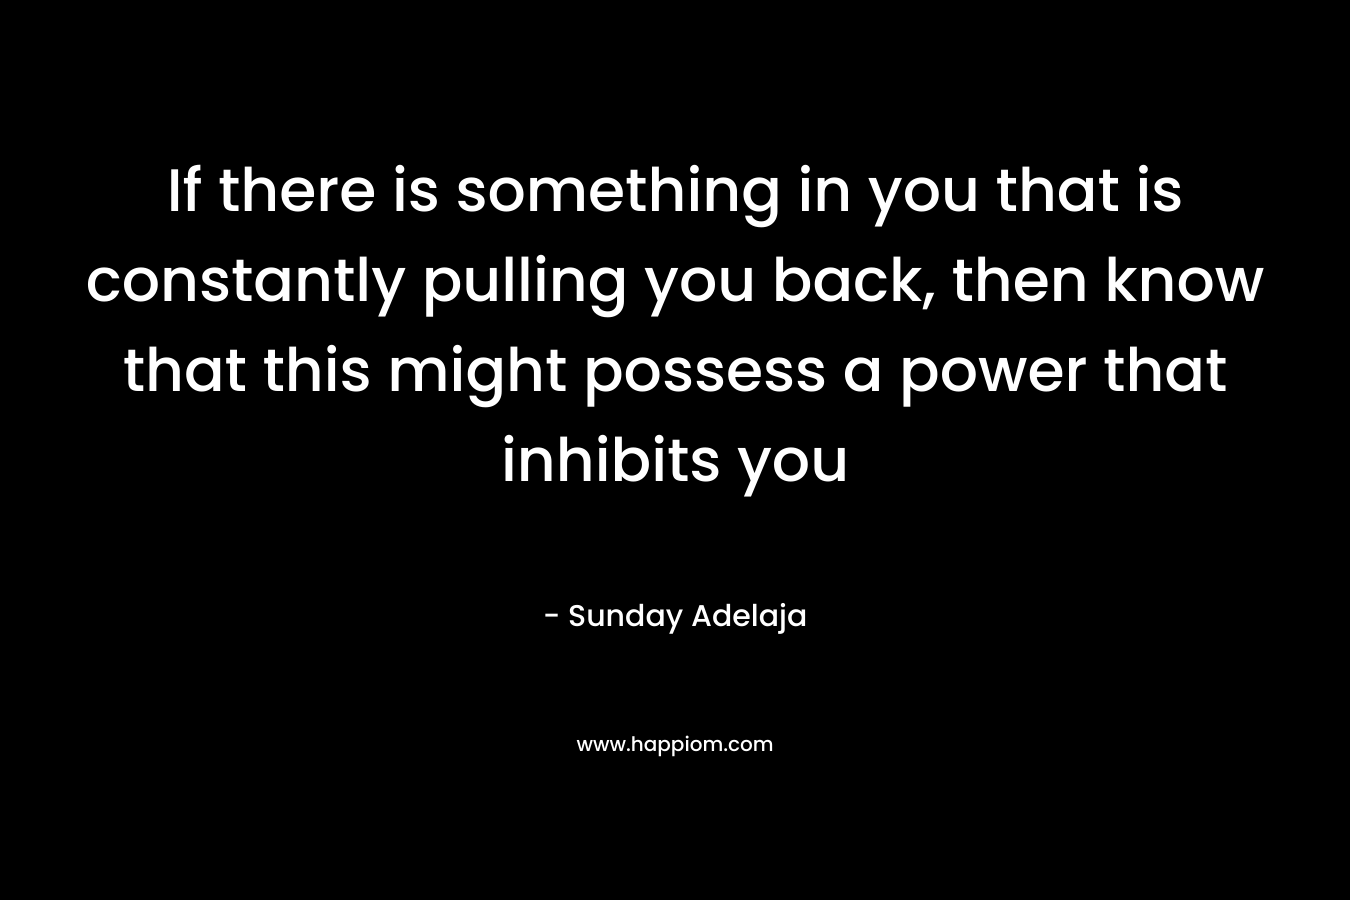 If there is something in you that is constantly pulling you back, then know that this might possess a power that inhibits you